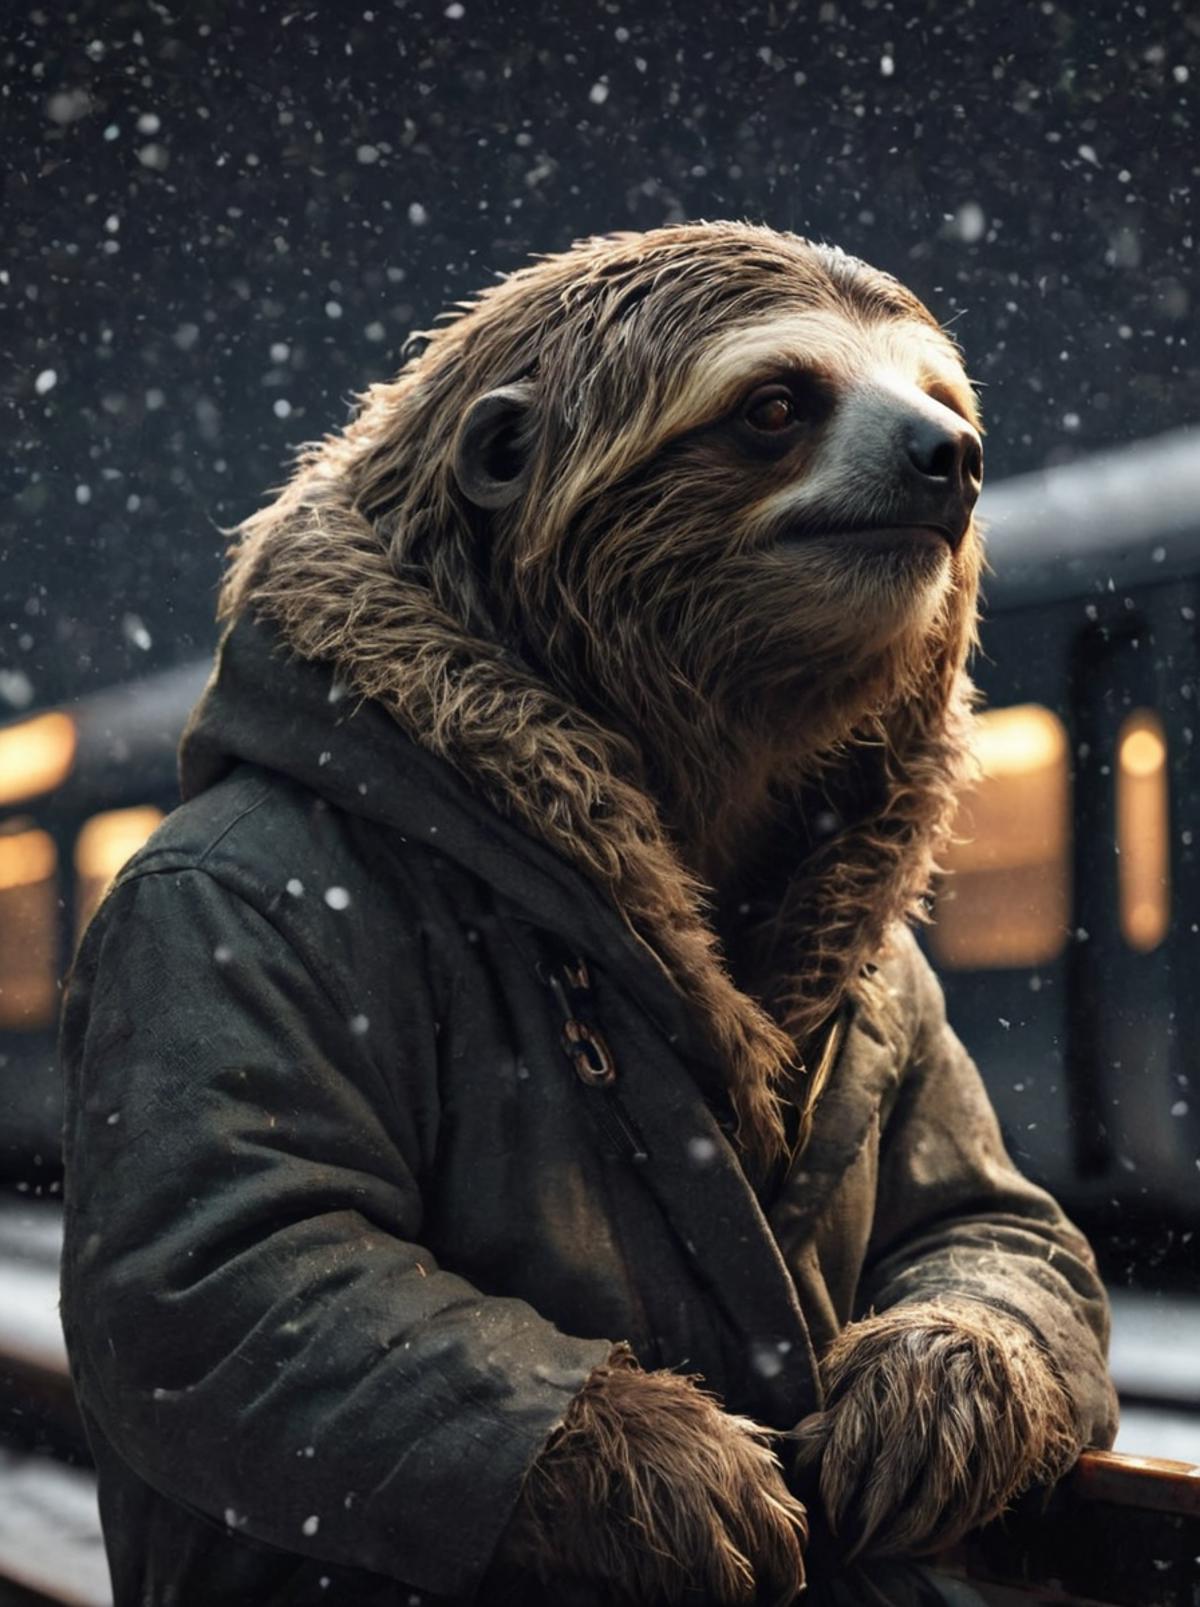 A sloth in a coat stands in the snow with a train in the background.